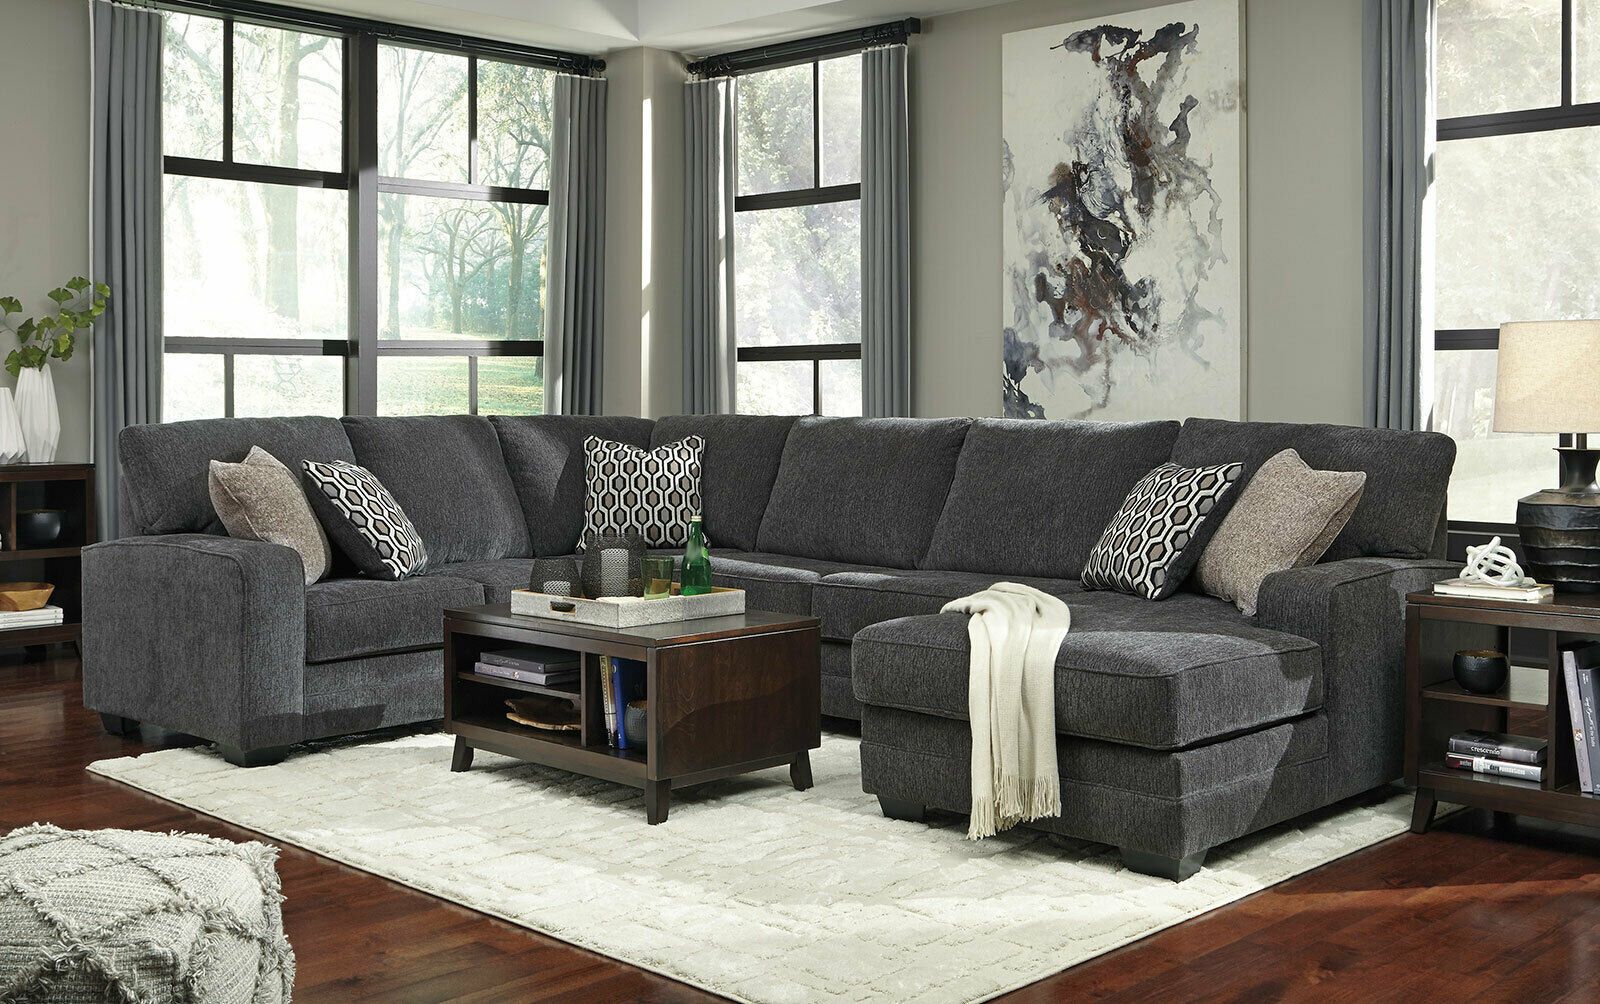 New Modern Sectional Living Room Dark Gray Chenille Sofa Couch Chaise Throughout Dark Gray Sectional Sofas (View 14 of 20)